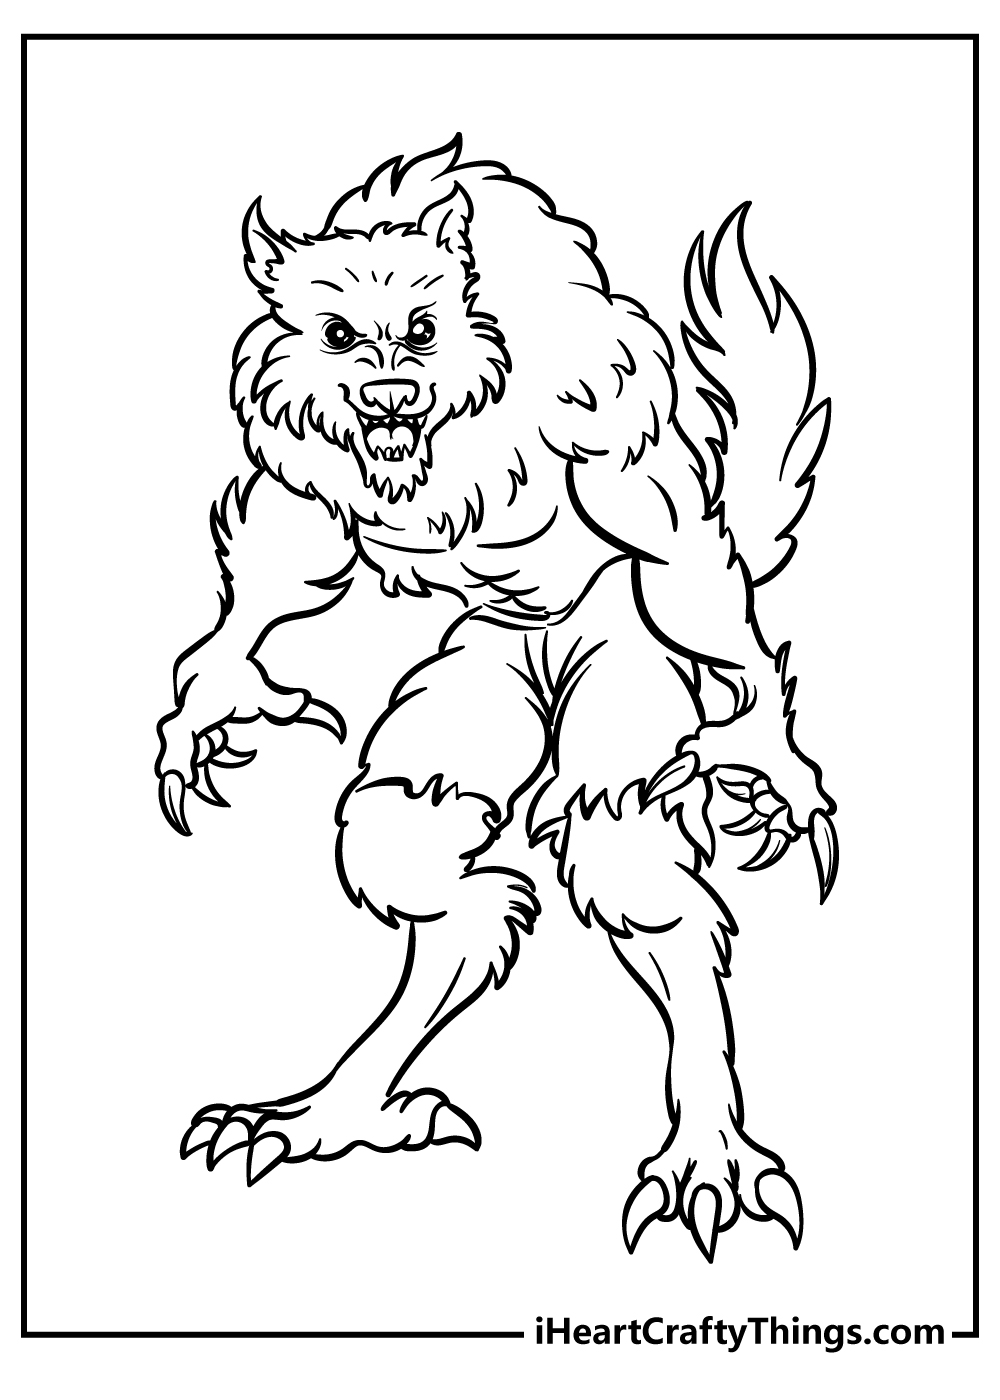 Werewolf coloring pages free printables